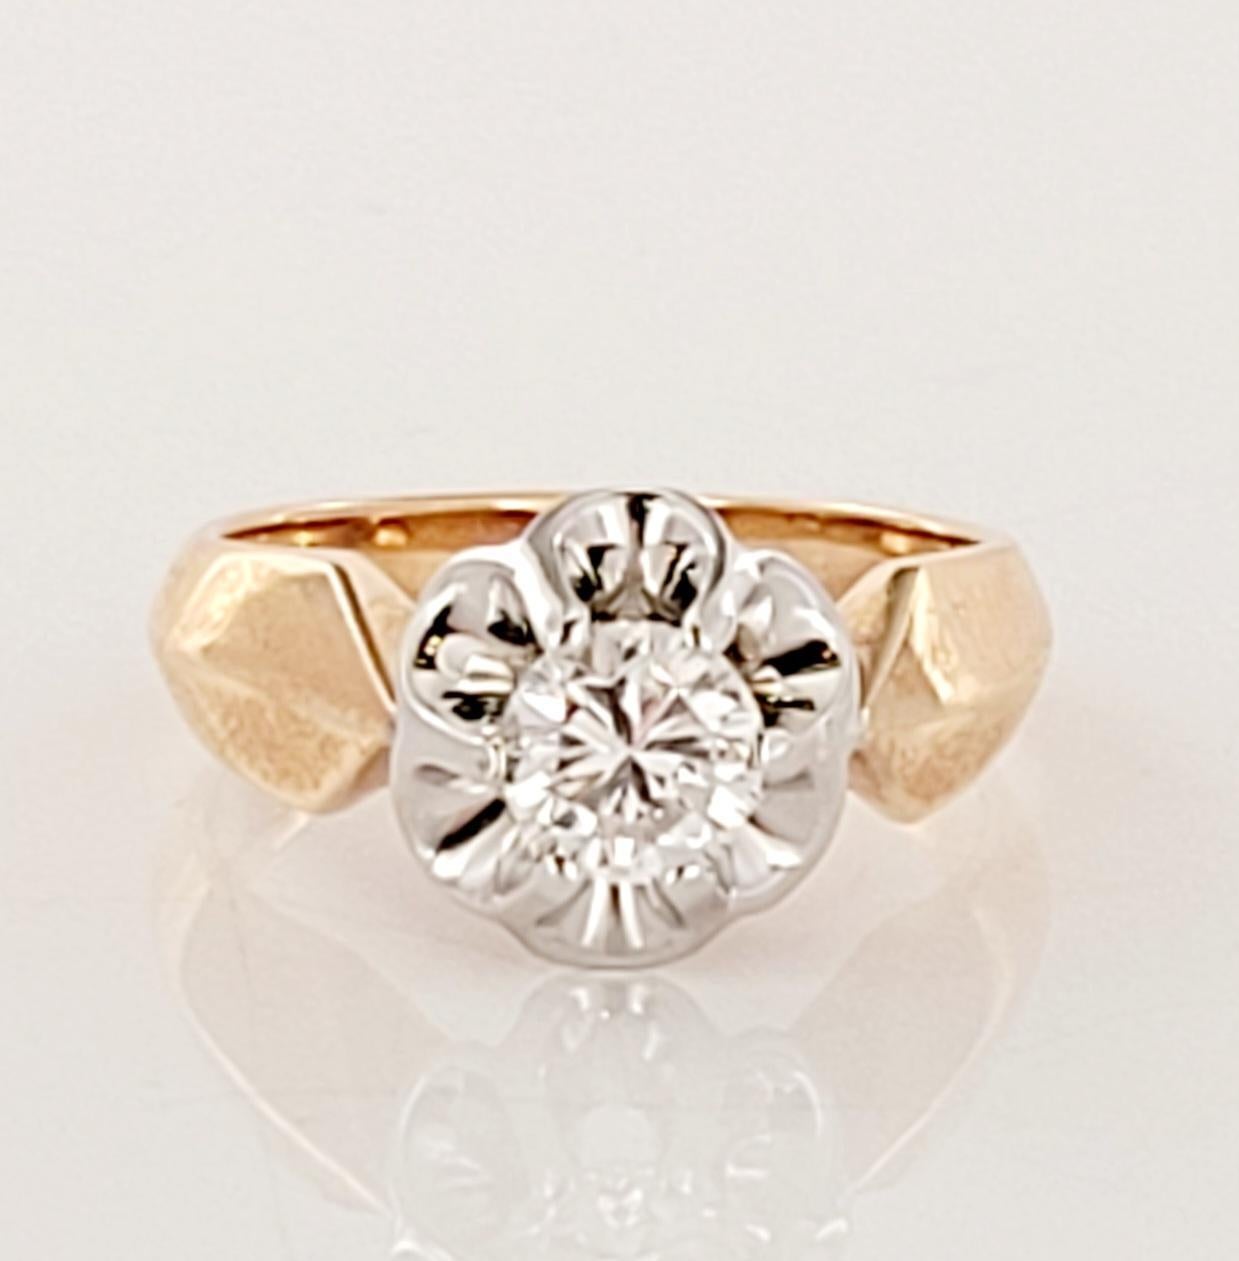 Experience the timeless elegance of vintage European style with this exquisite solitaire diamond ring. Crafted from 14K rose gold and palladium, this ring boasts a stunning 1ctw diamond that sparkles with unparalleled brilliance. The metal